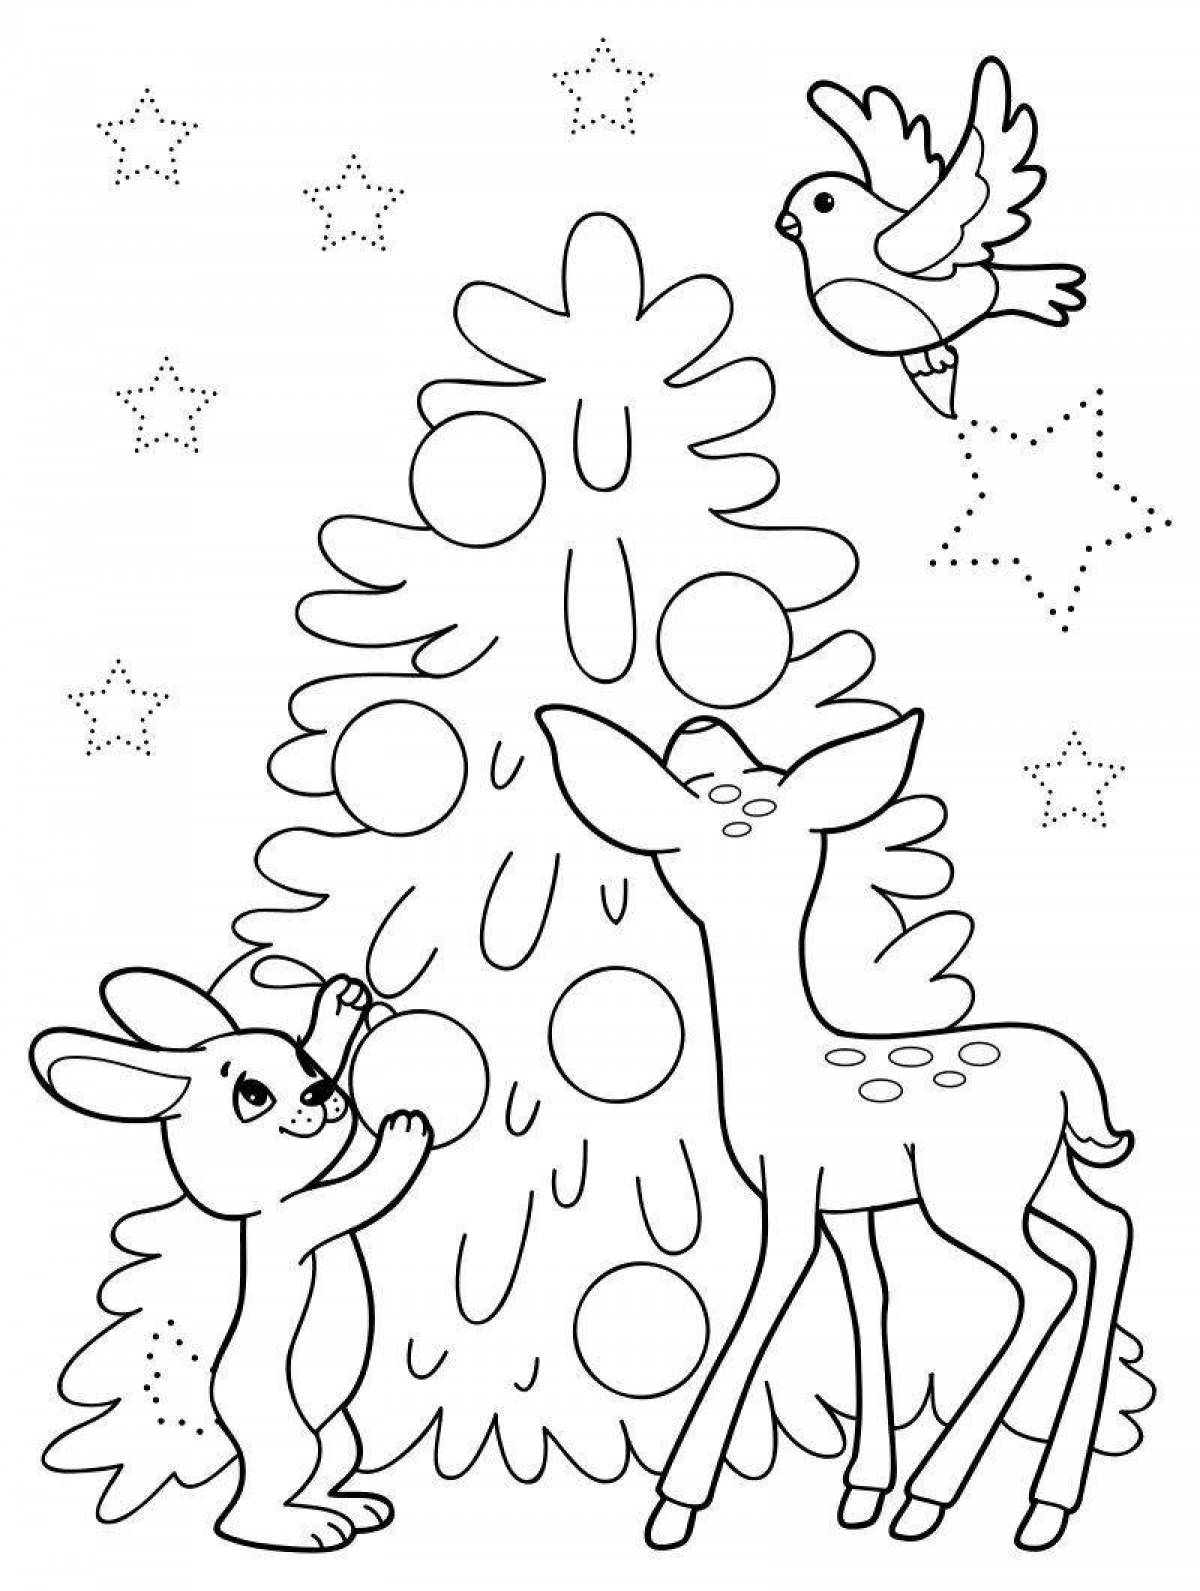 Coloring bright Christmas tree for children 5-6 years old